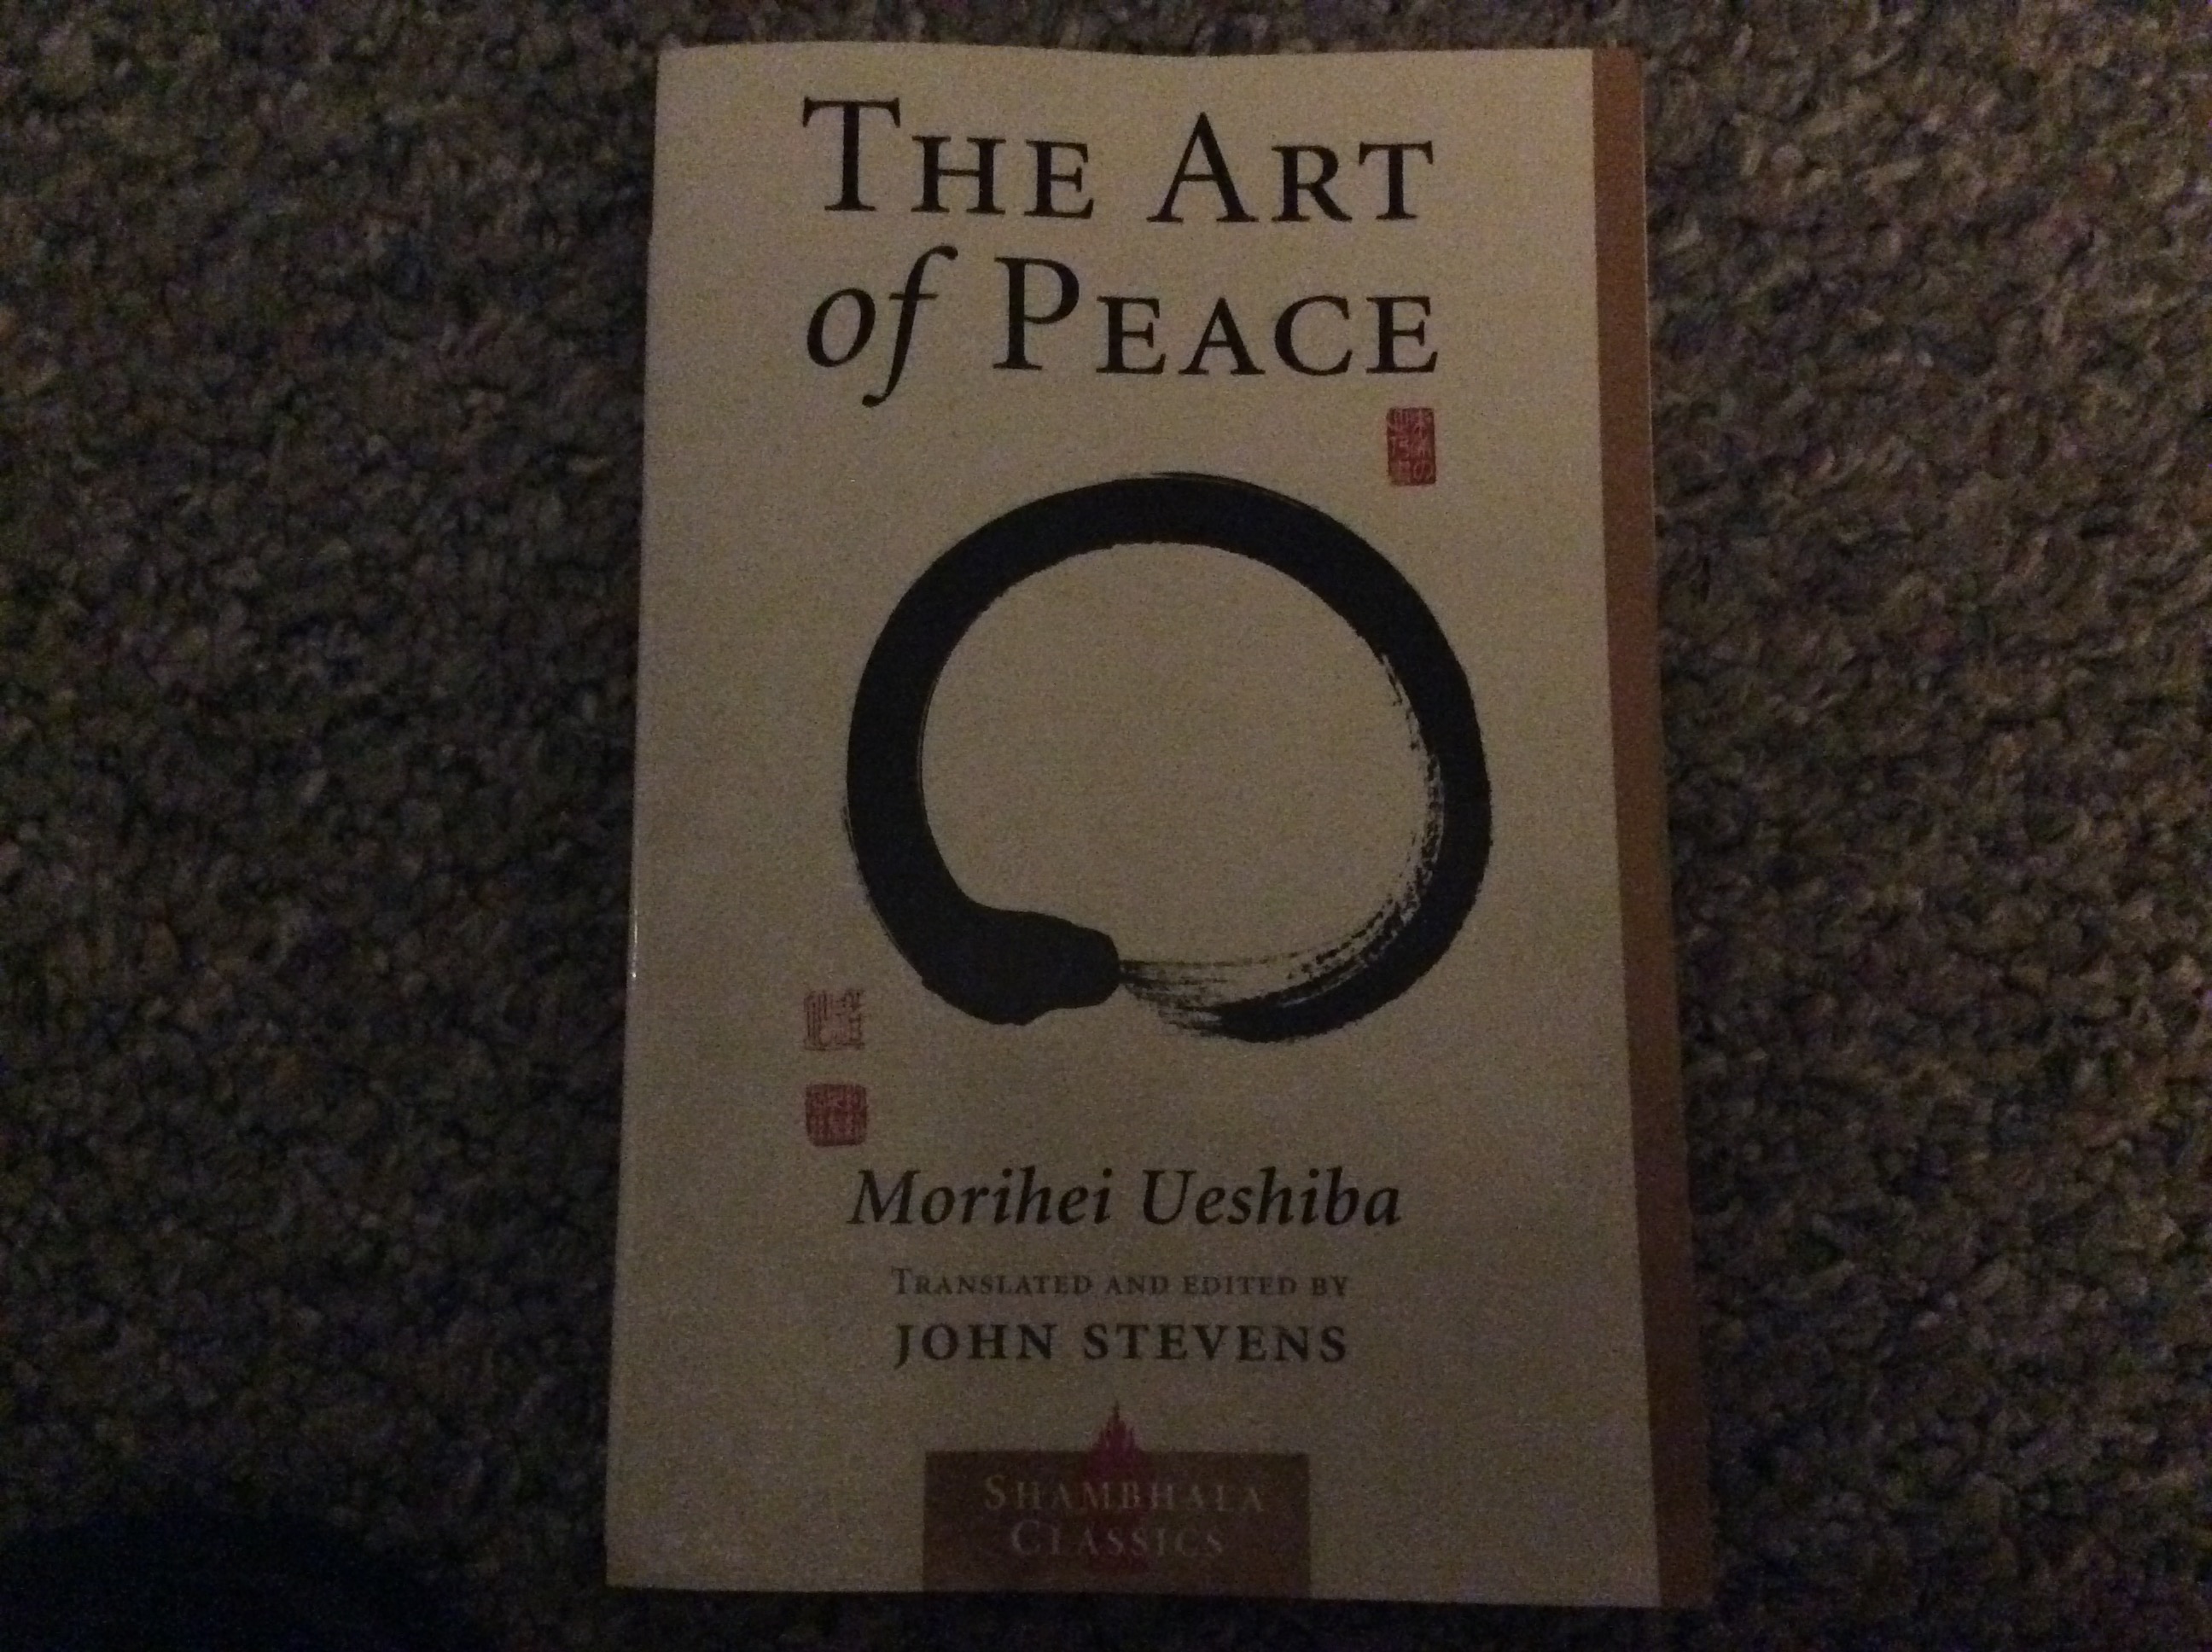 THE ART OF PEACE IS THE WAY